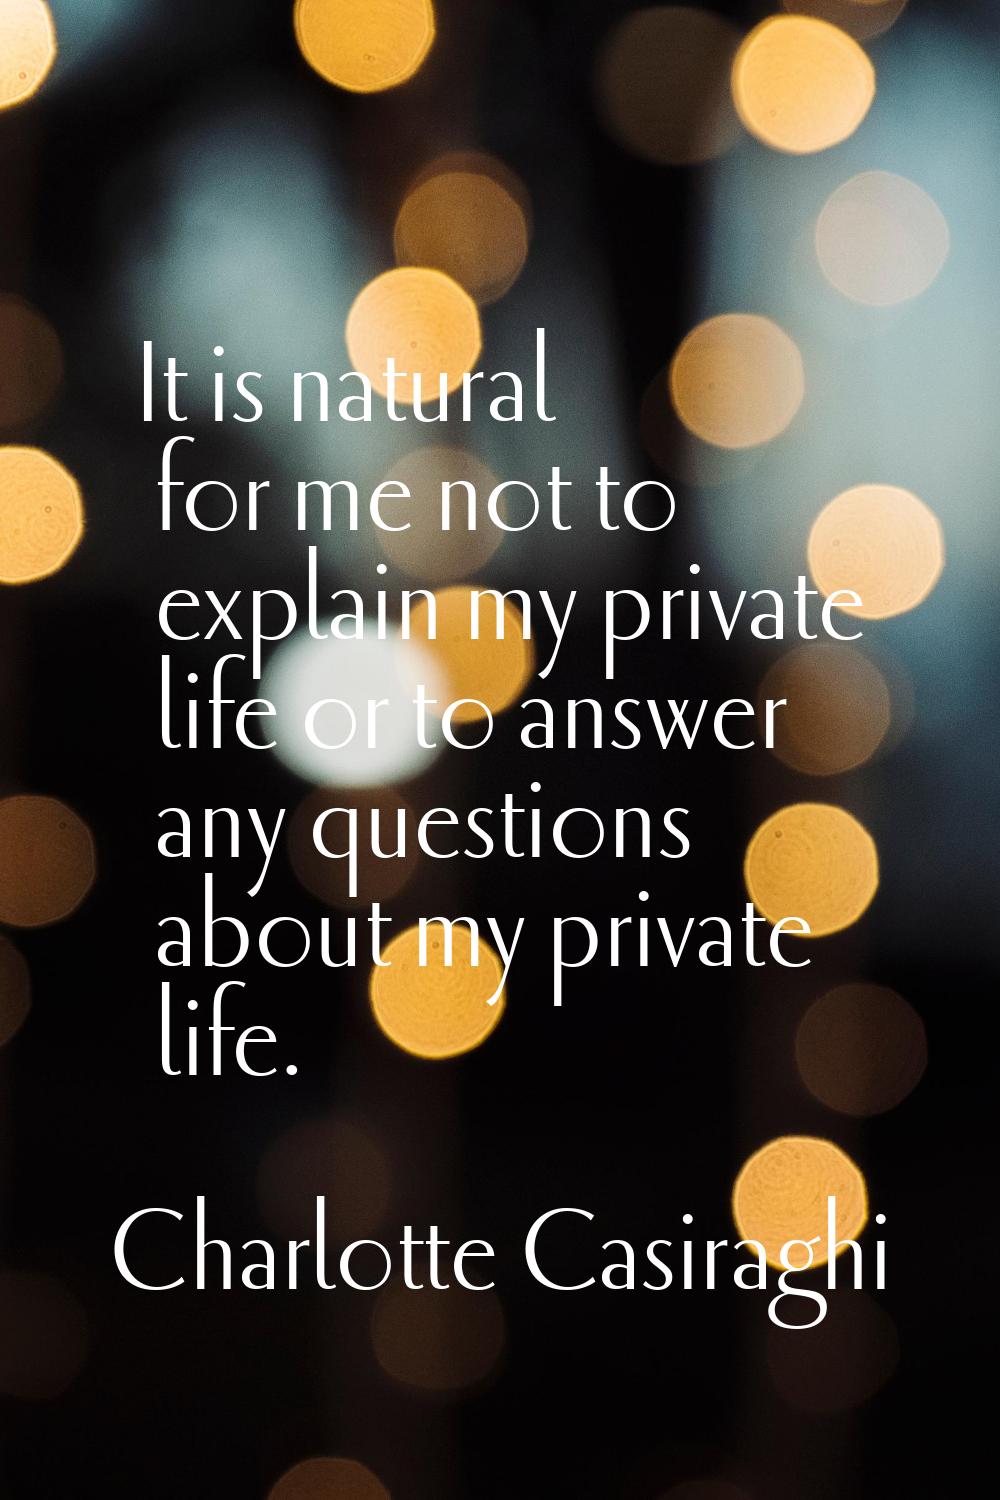 It is natural for me not to explain my private life or to answer any questions about my private lif